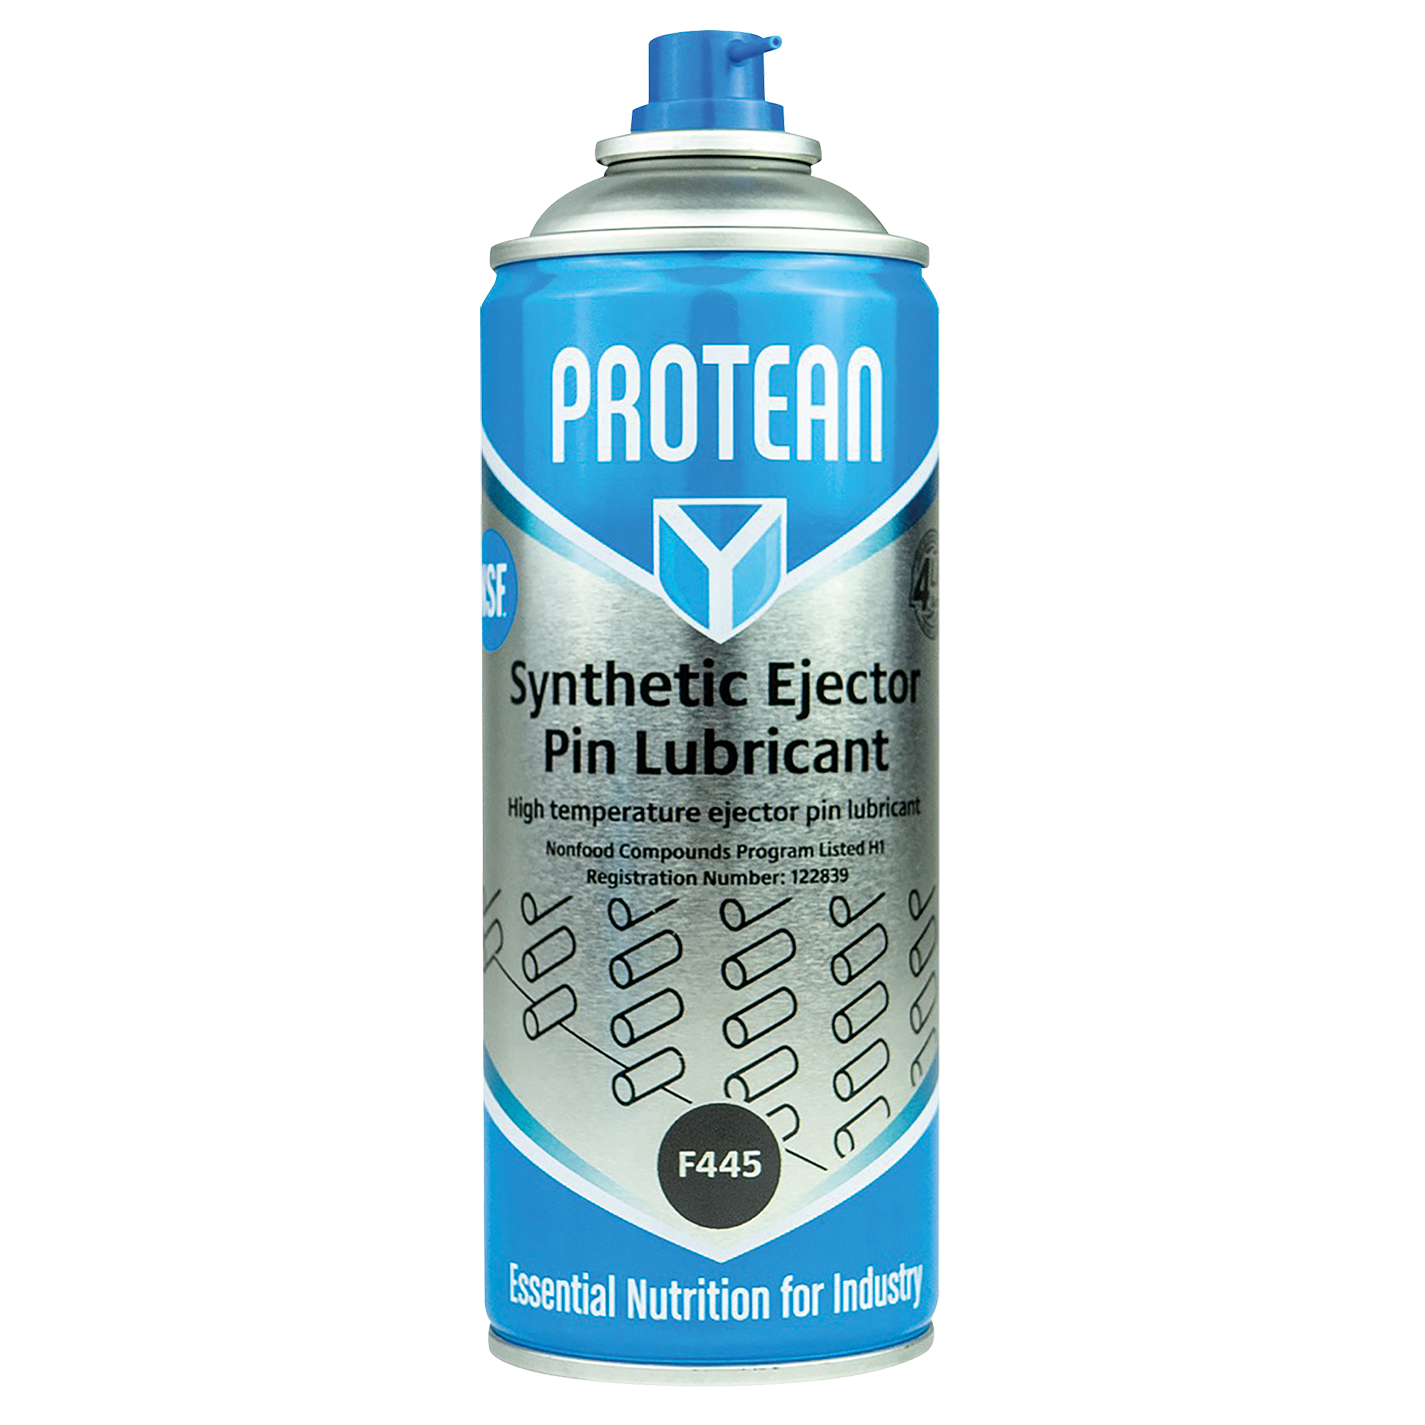 PROTEAN SYNTHETIC EJECTOR PIN LUBRICANT | Hydair